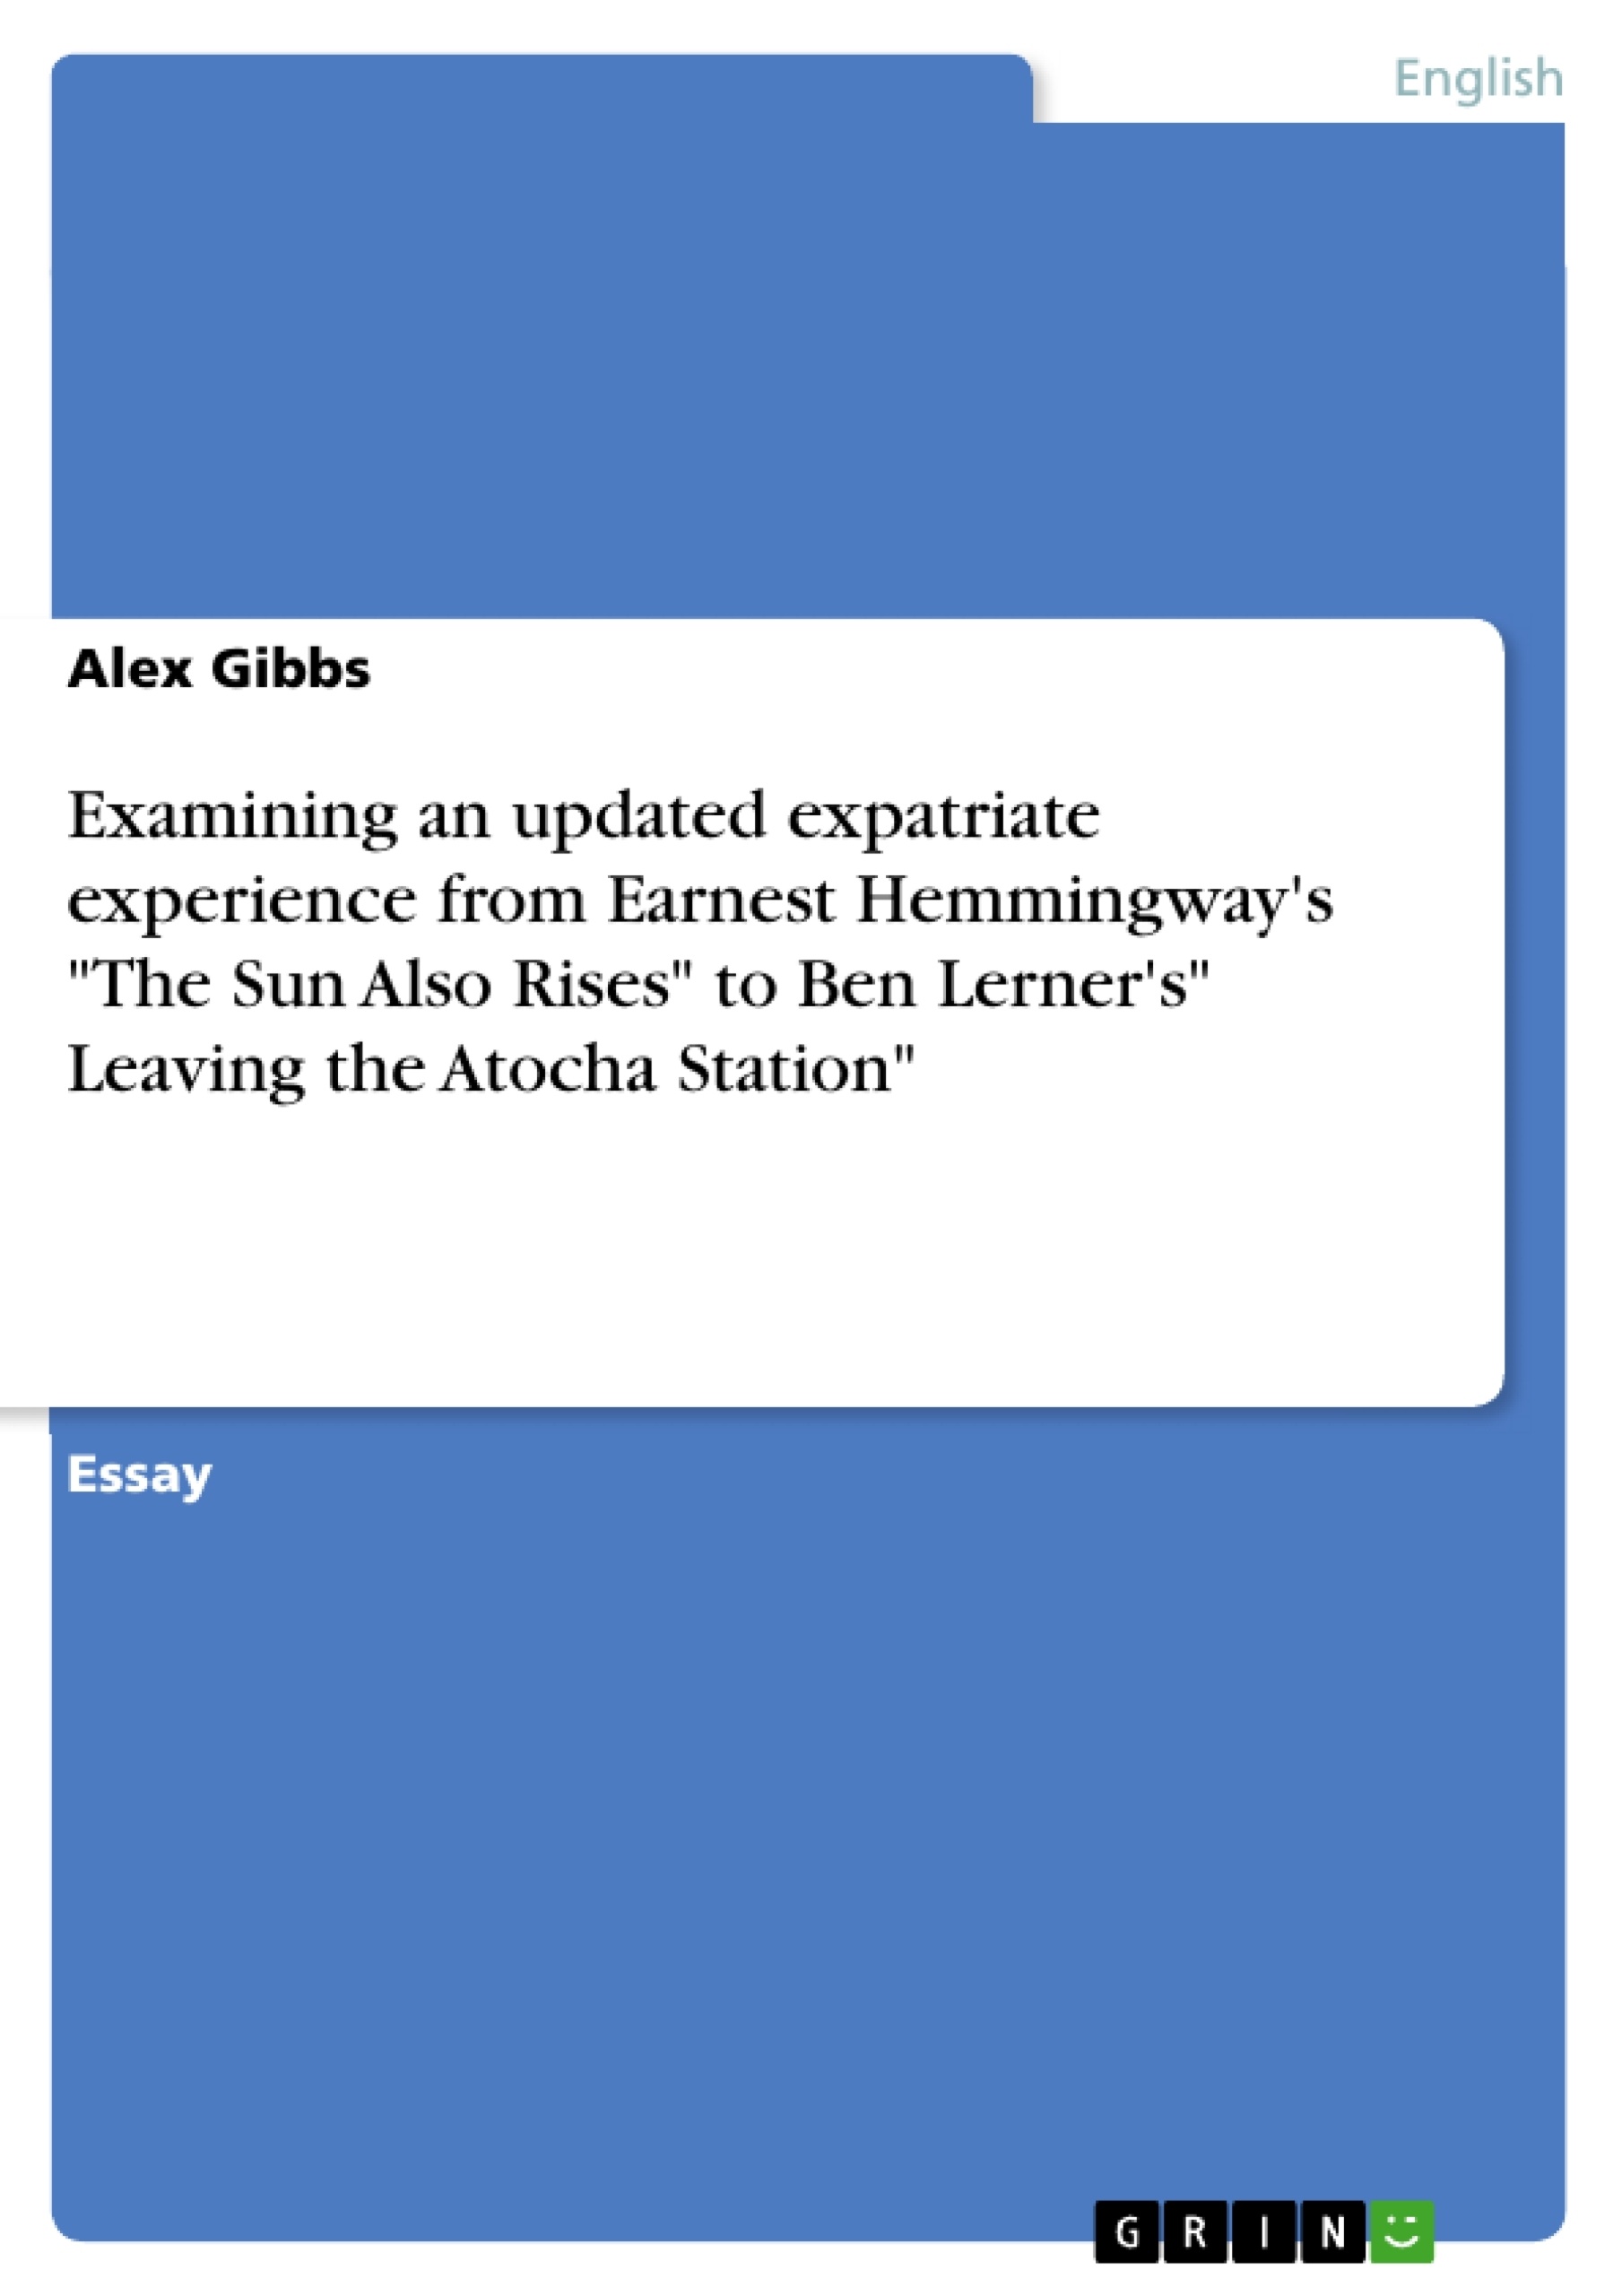 Title: Examining an updated expatriate experience from Earnest Hemmingway's "The Sun Also Rises" to Ben Lerner's" Leaving the Atocha Station"